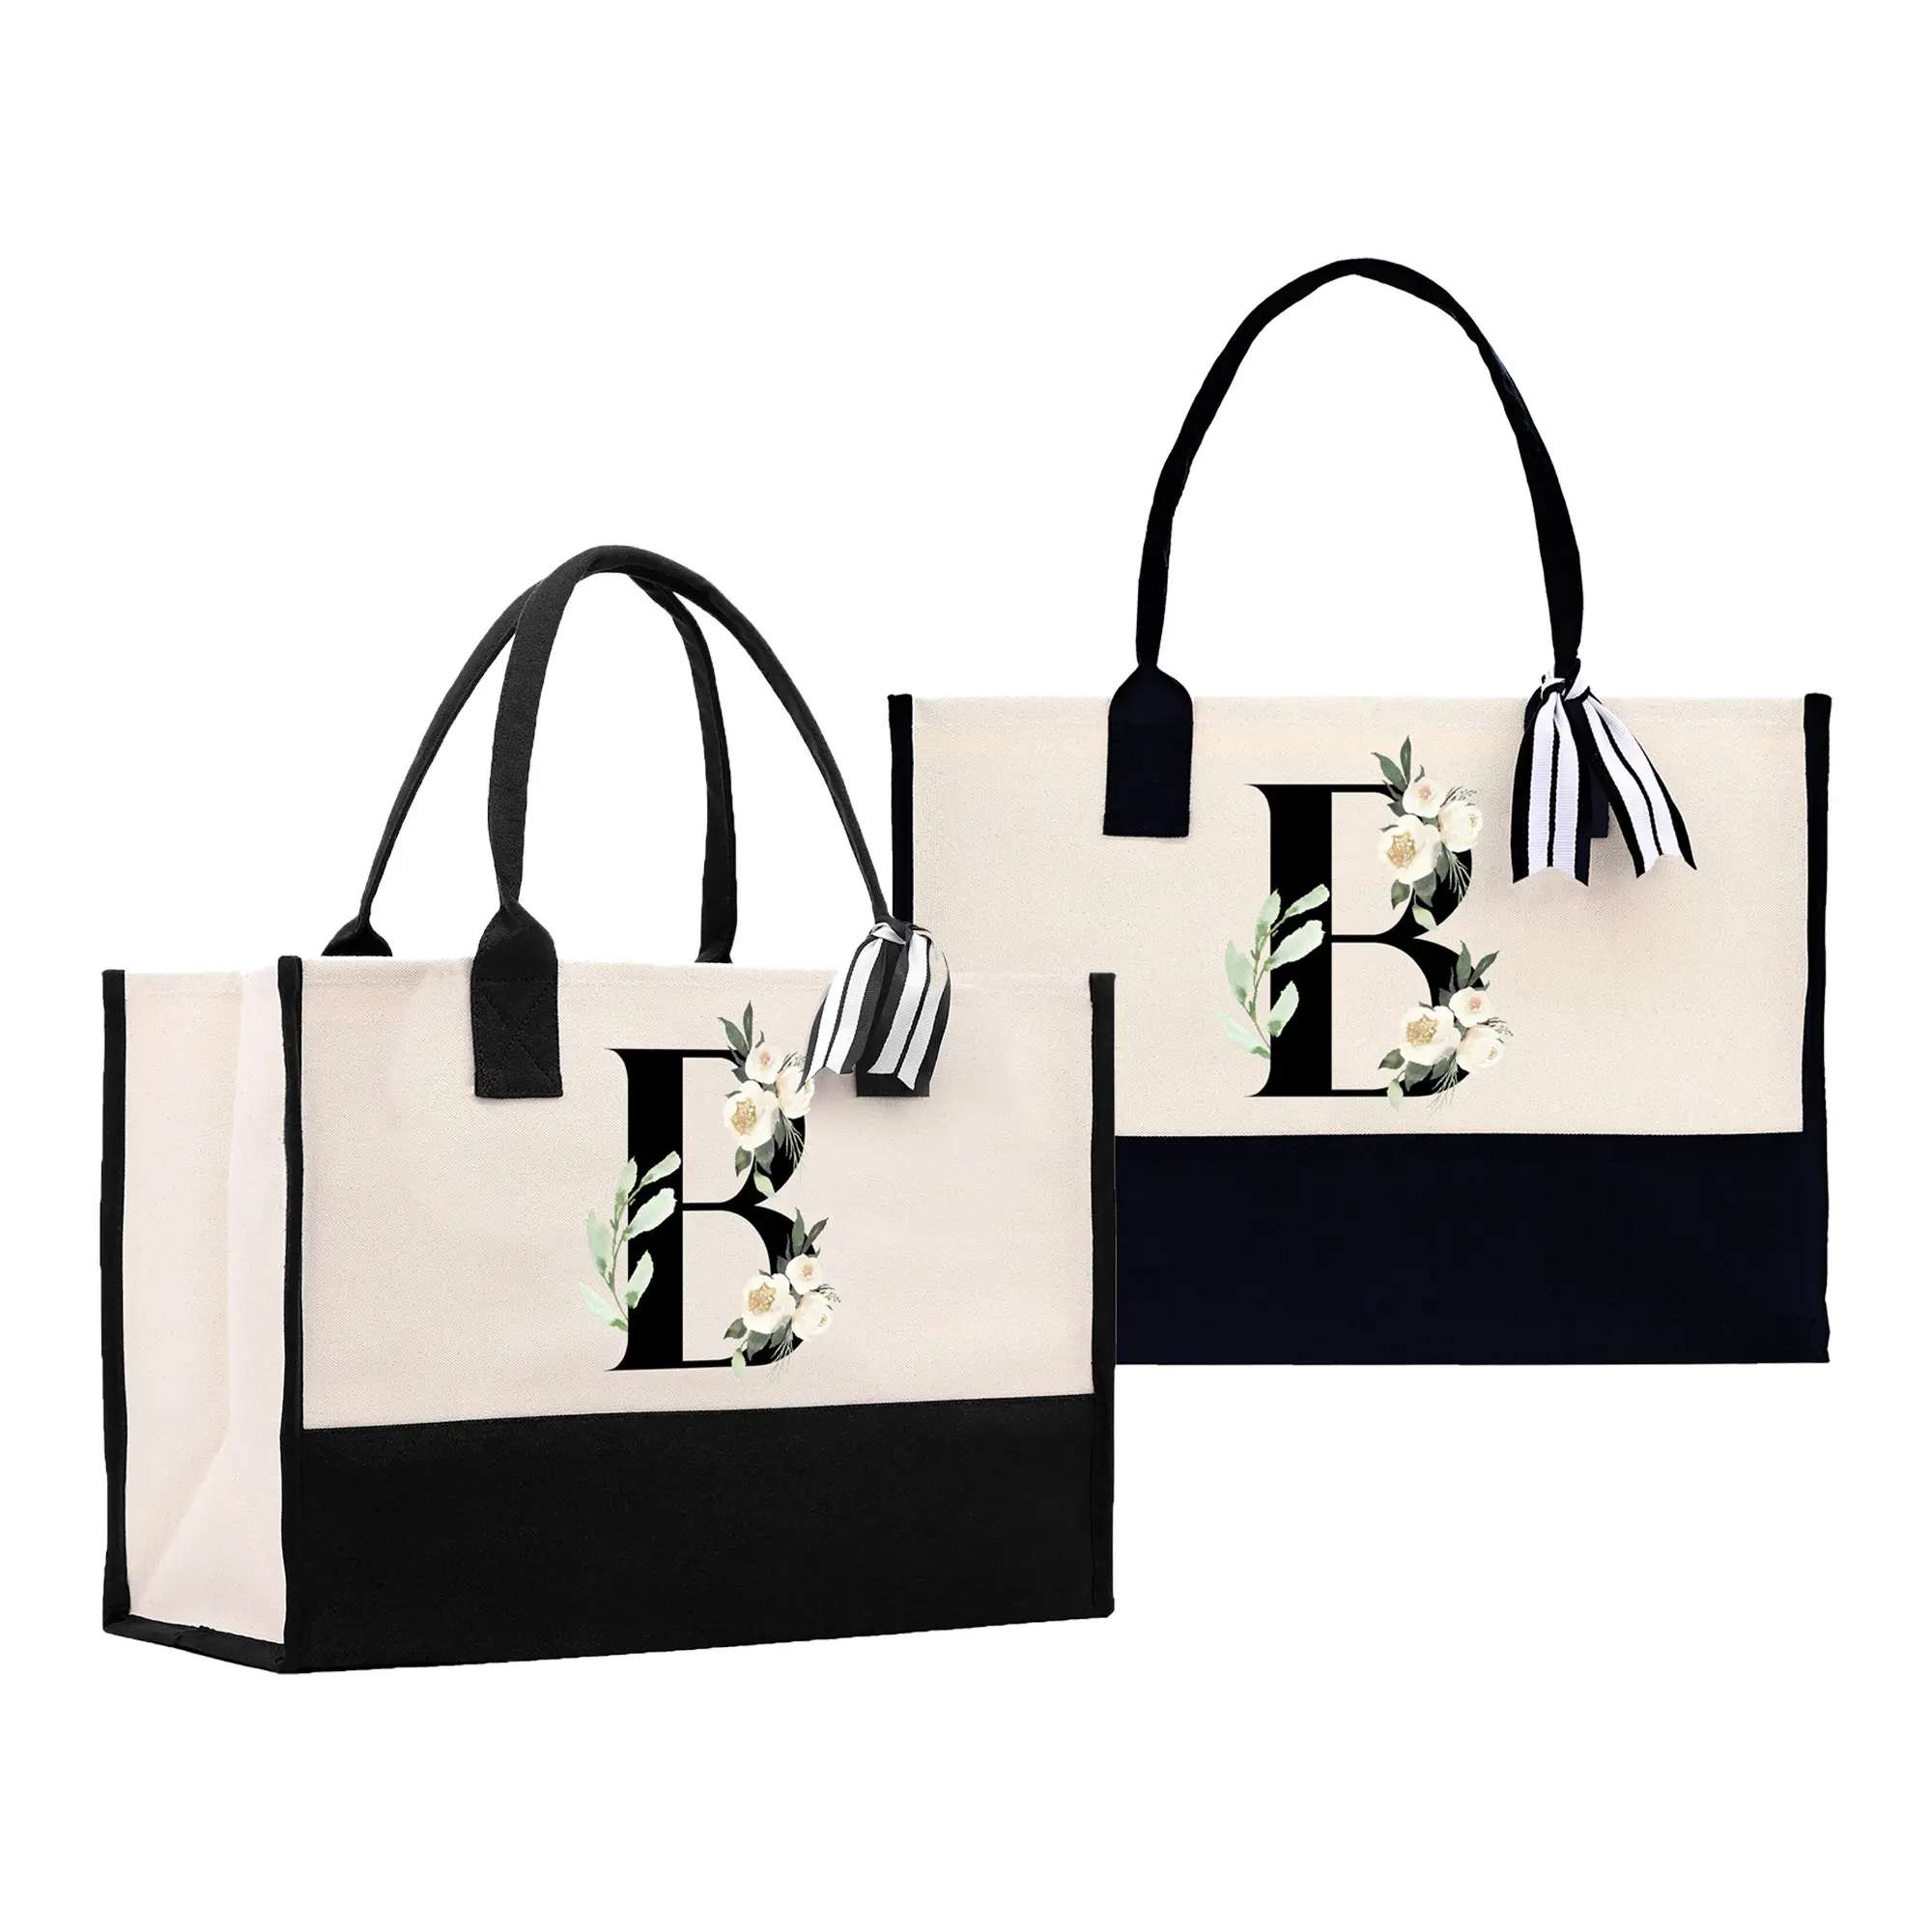 Newest design Floral Wedding Birthday Bridesmaid gift Canvas Tote custom name Letter A Z Initial Two Tone Chic Tote Bag